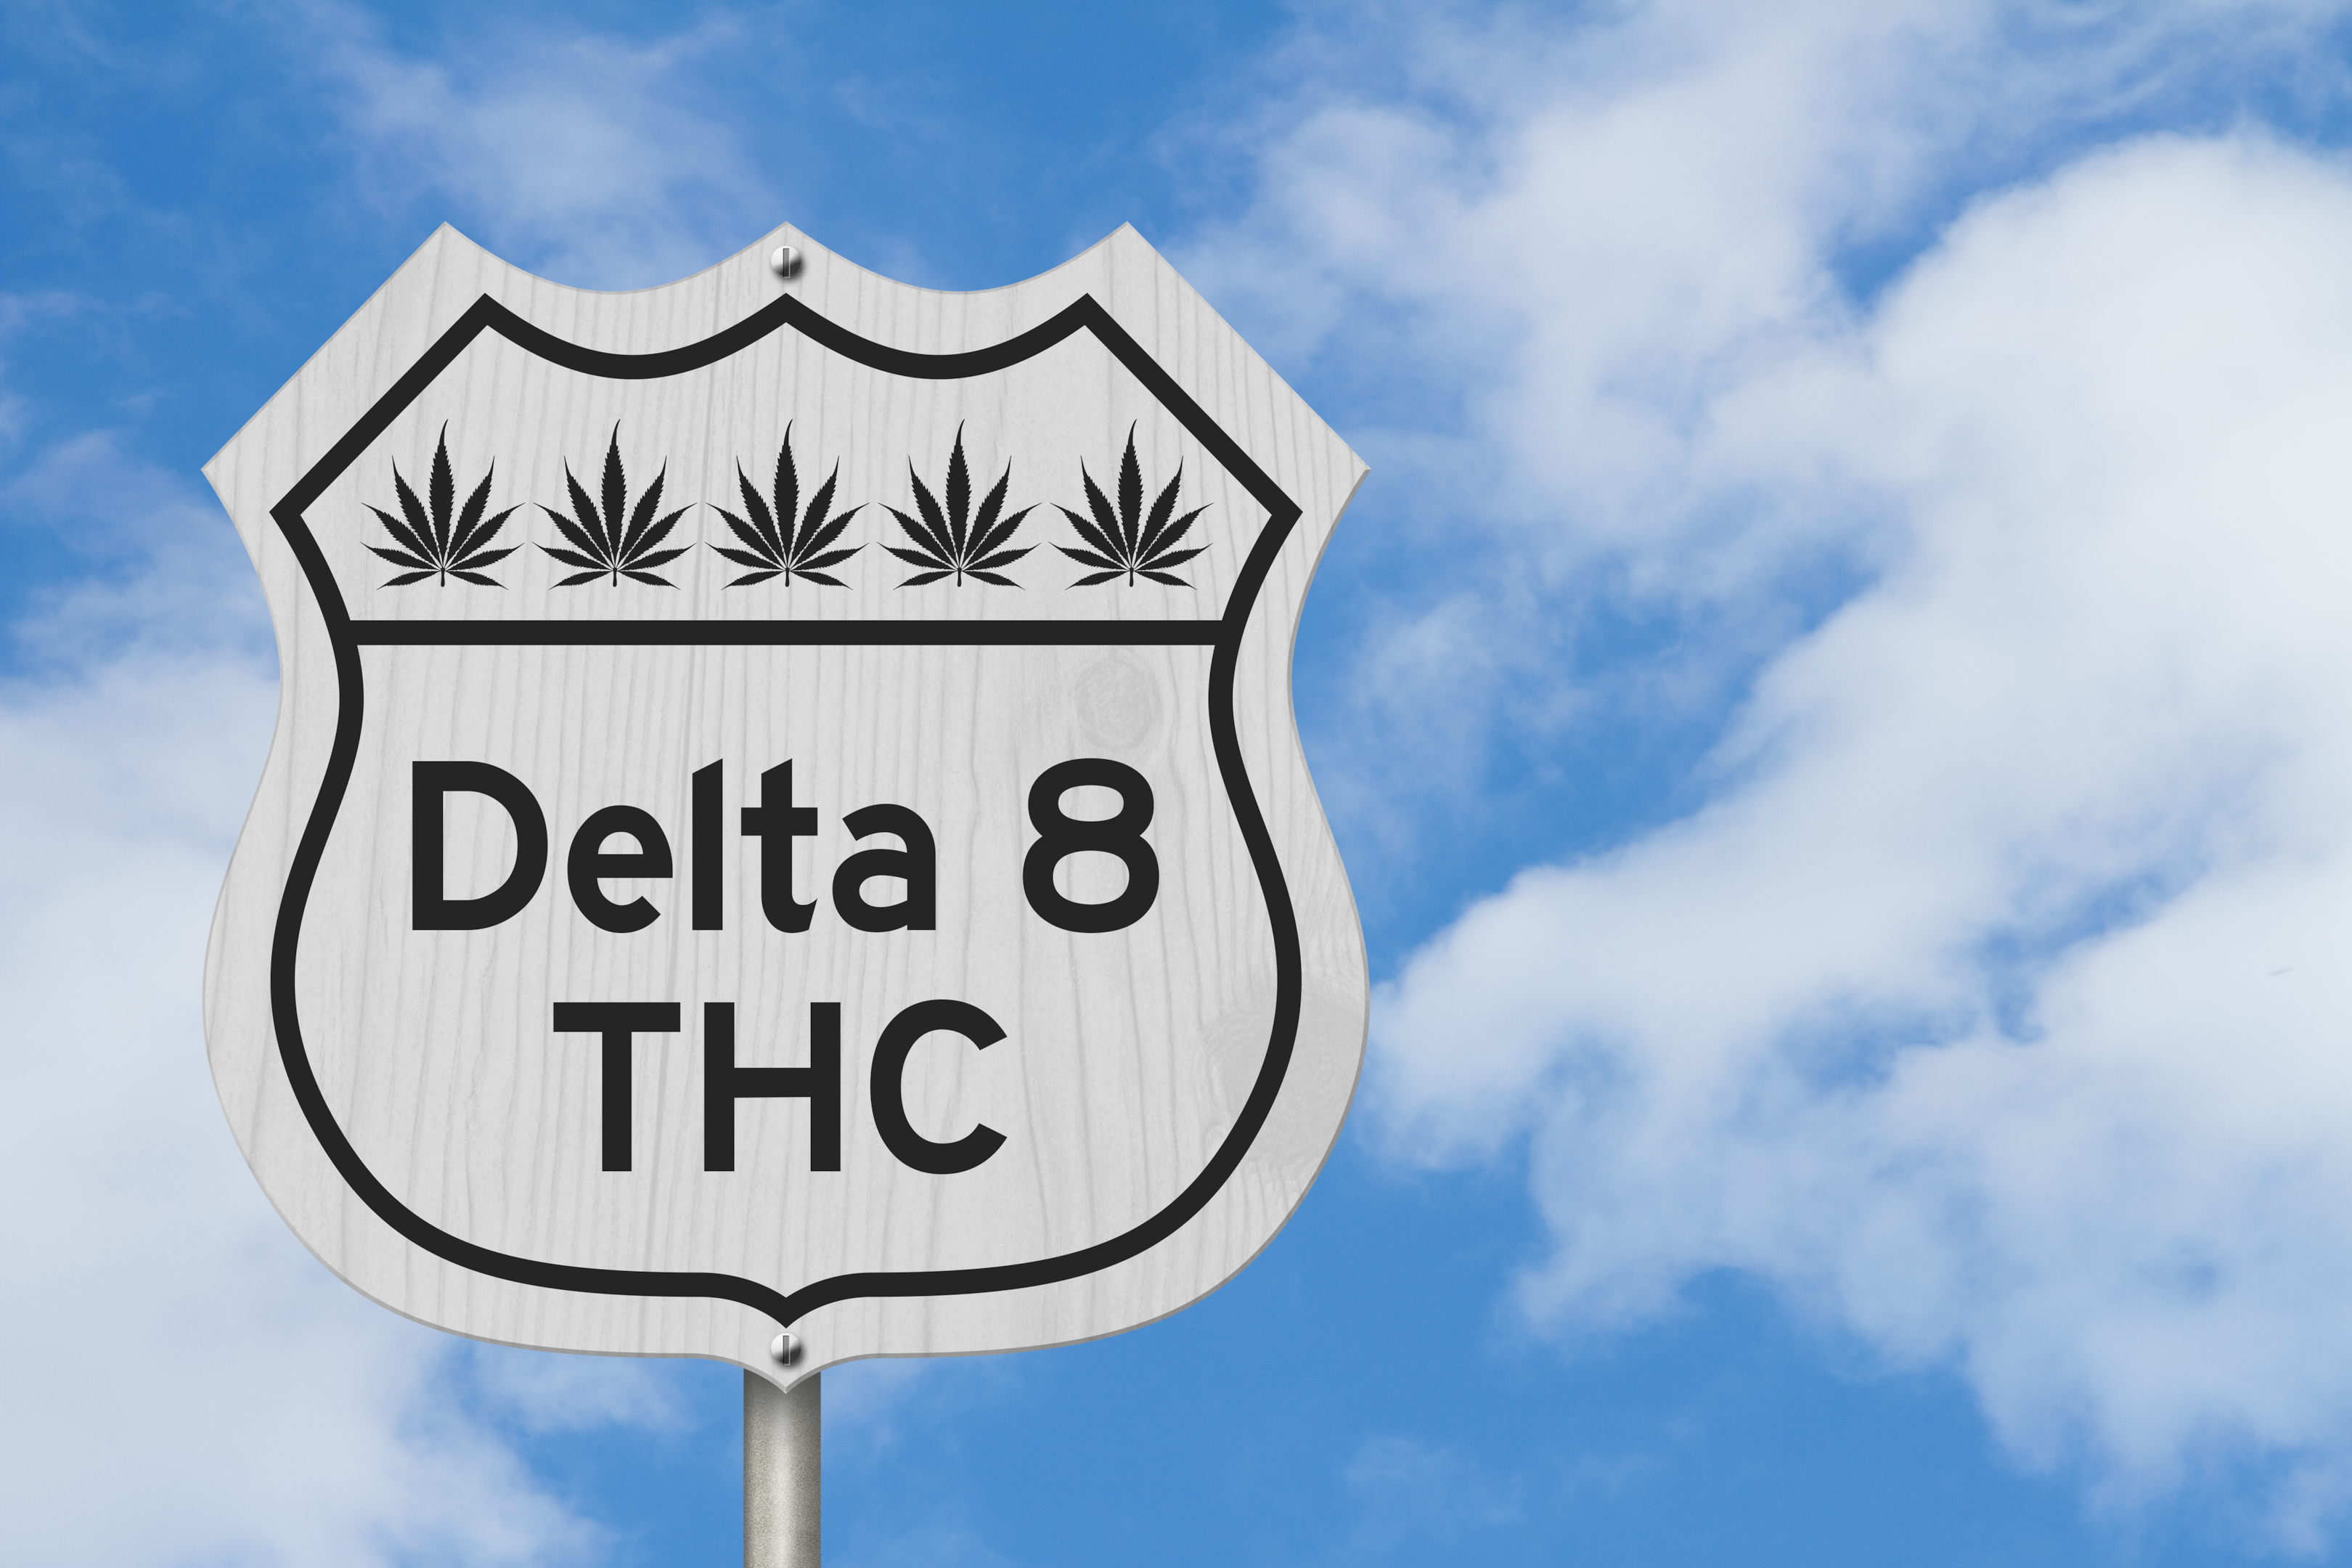 Delta 8 THC is federally legal, allowing for the creation of Delta 8 gummies and other THC edibles and products.